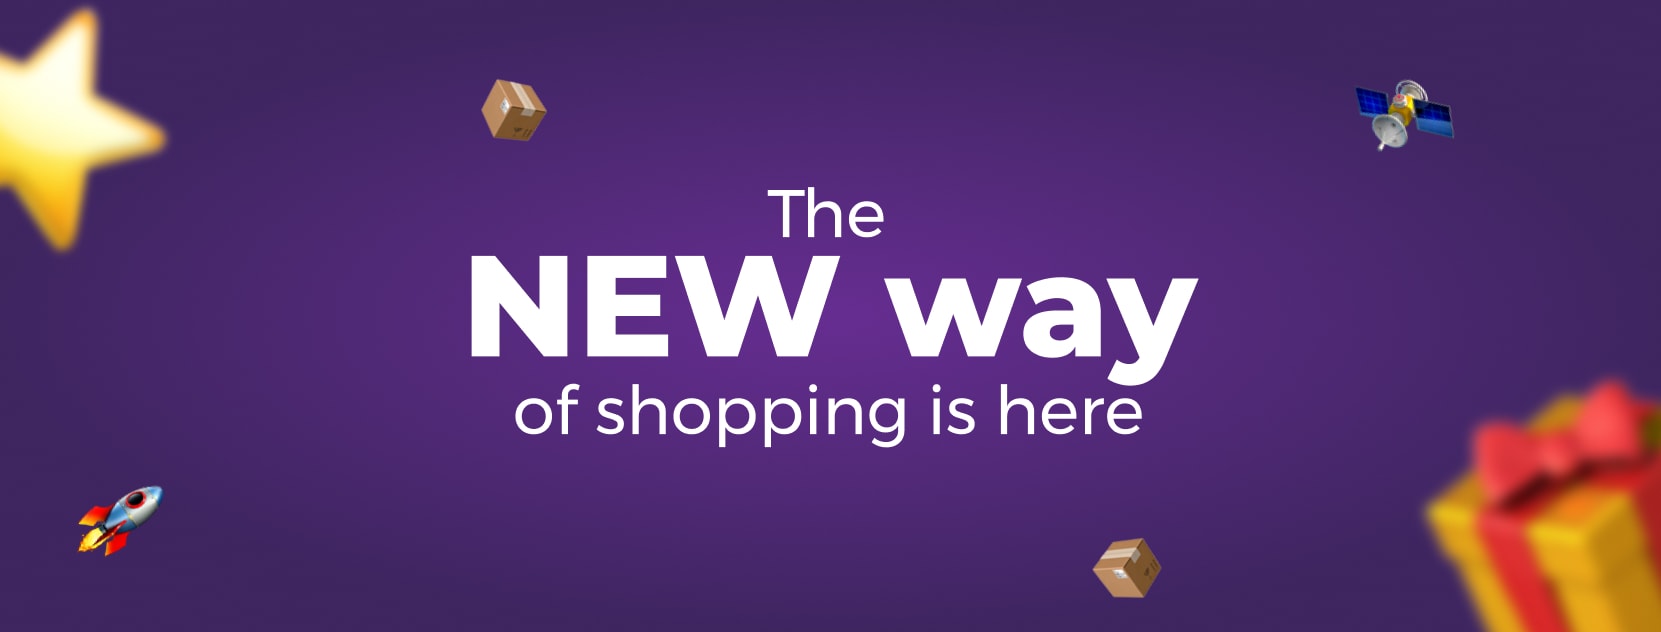 WOWOX The NEW way of shopping